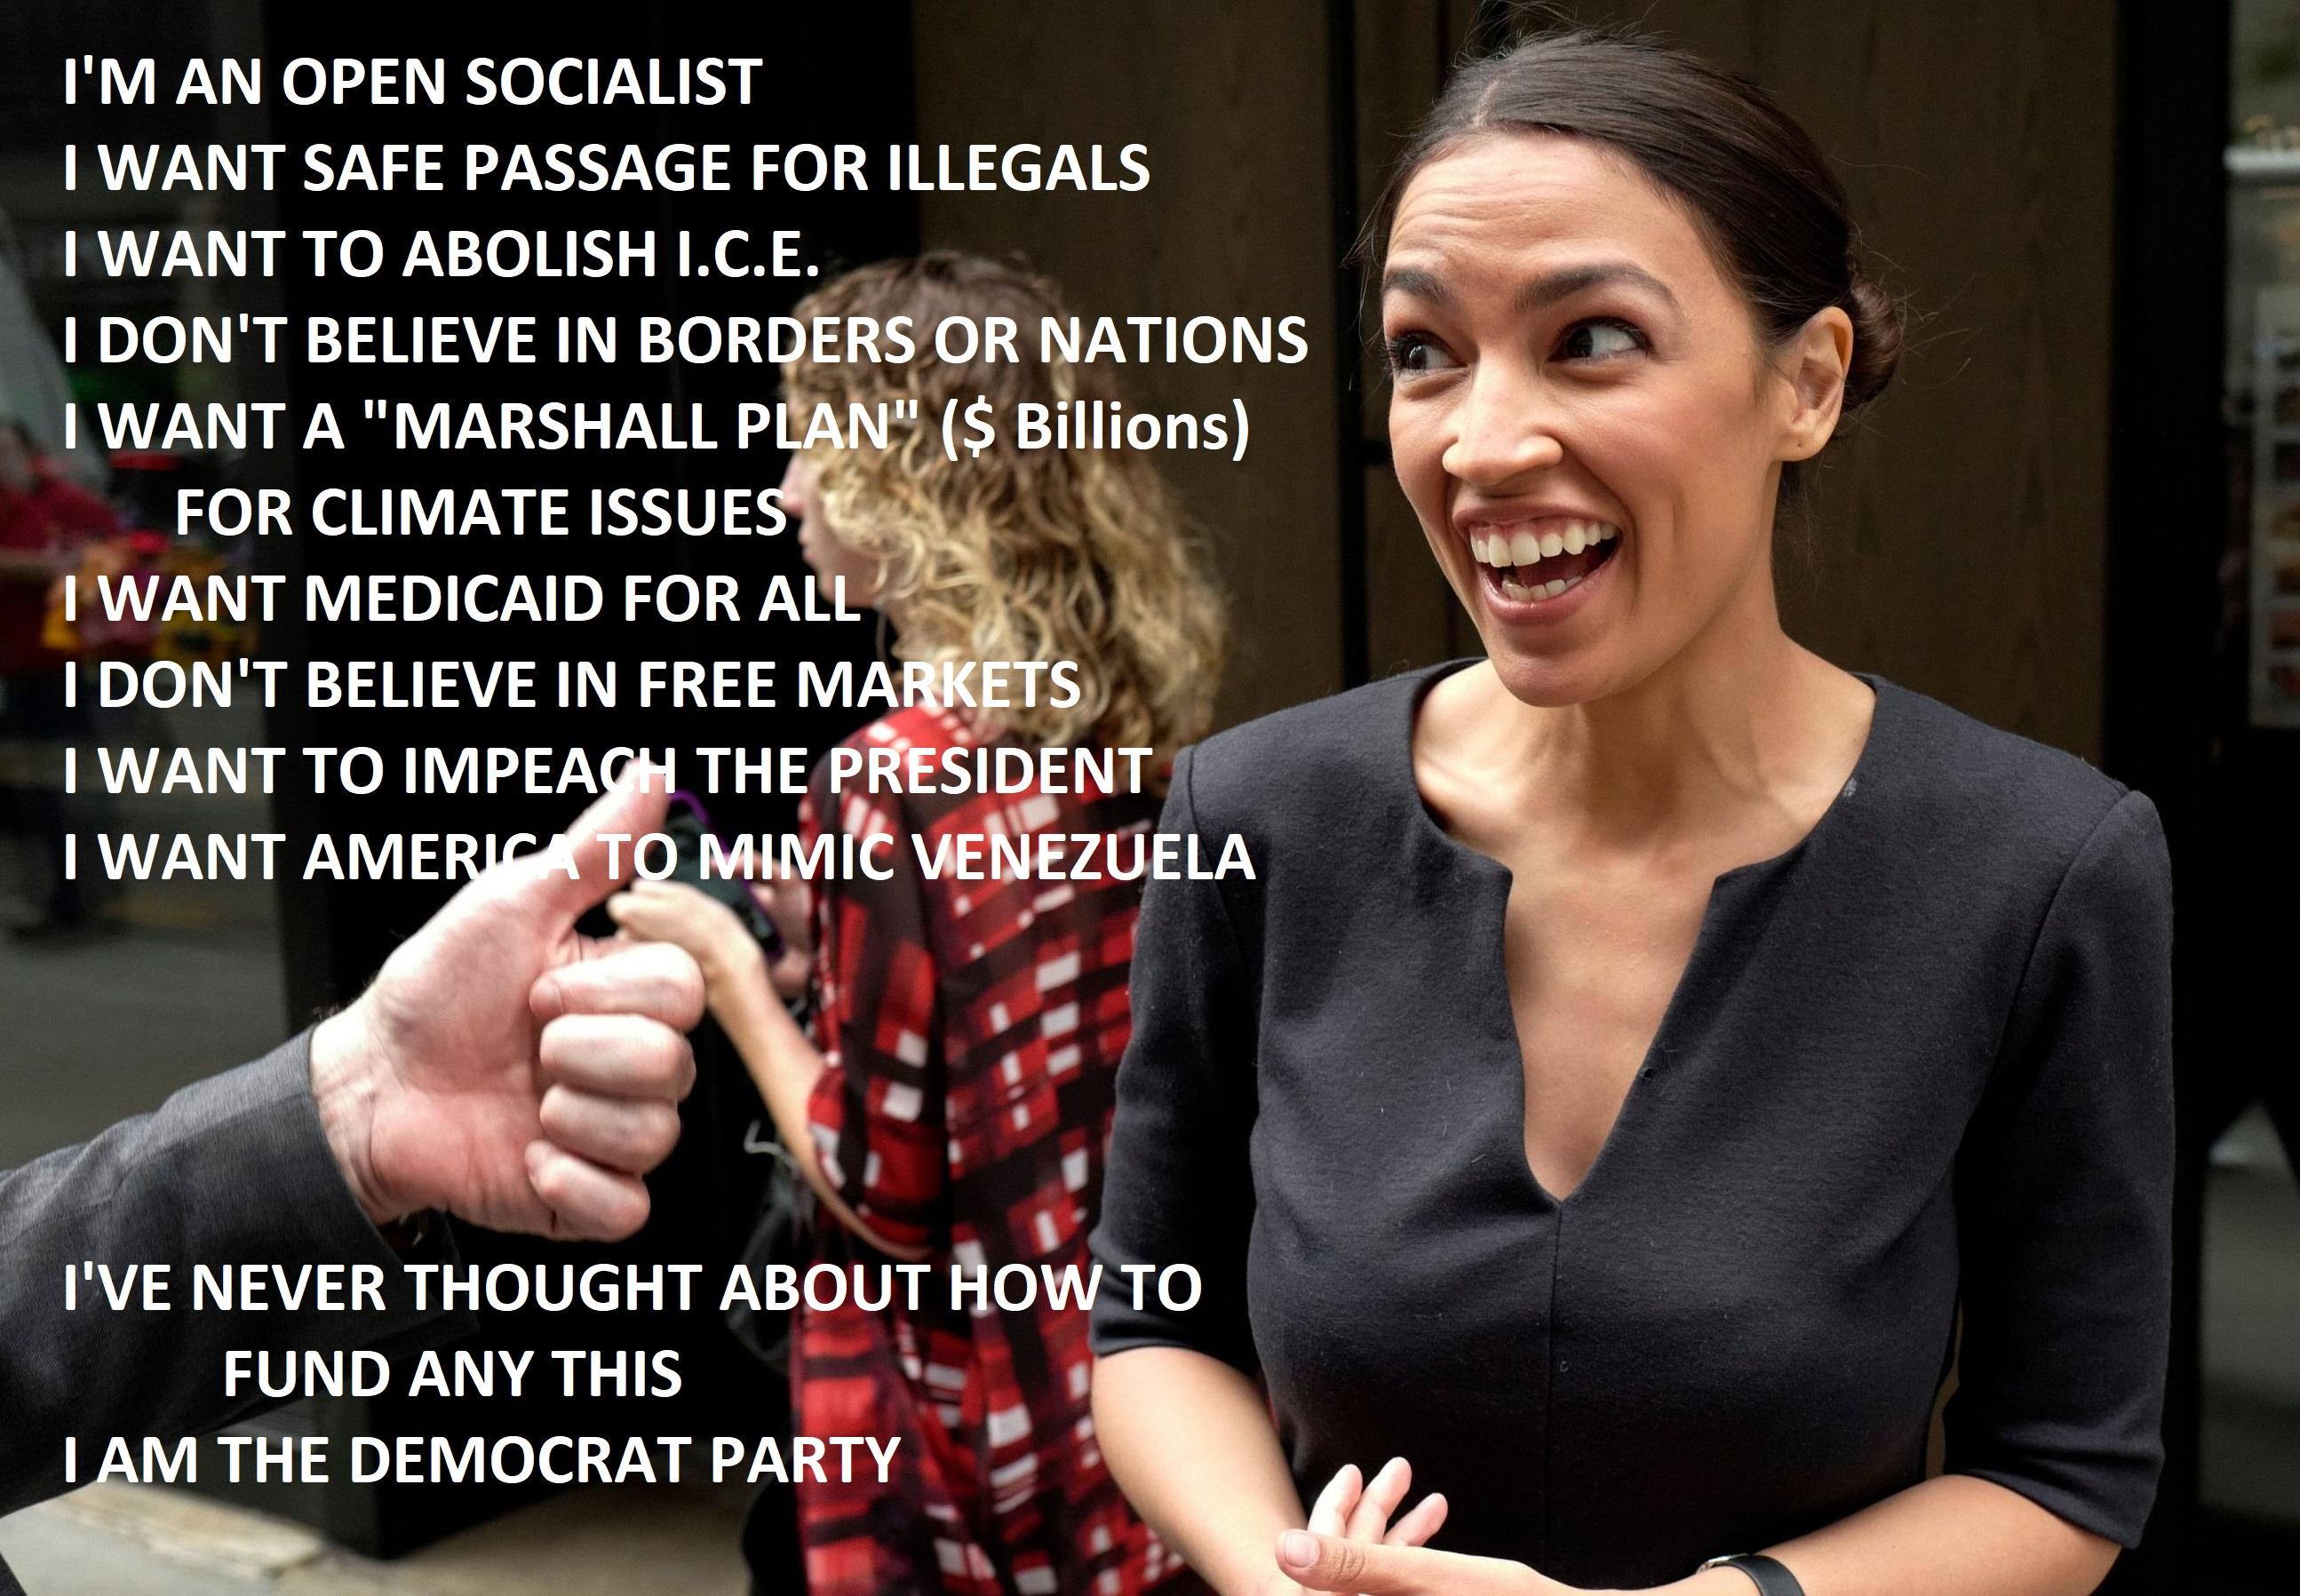 Figure 23: Alexandria-Ocasio Cortez looks off camera while laughing. A man’s arm and hand can be seen coming in from the left and making a thumbs up. Several lines of text to the left of AOC read “I’m an open socialist. I want safe passage for illegals. I want to abolish I.C.E. I don’t believe in borders or nations. I want a ‘Marshall Plan’ ($ Billions) for climate issues. I want Medicaid for all. I don’t believe in free markets. I want to impeach the president. I want America to mimic Venezuela.” After a gap of a few lines, the text continues, “I’ve never thought about how to fund any of this. I am the Democratic Party.”